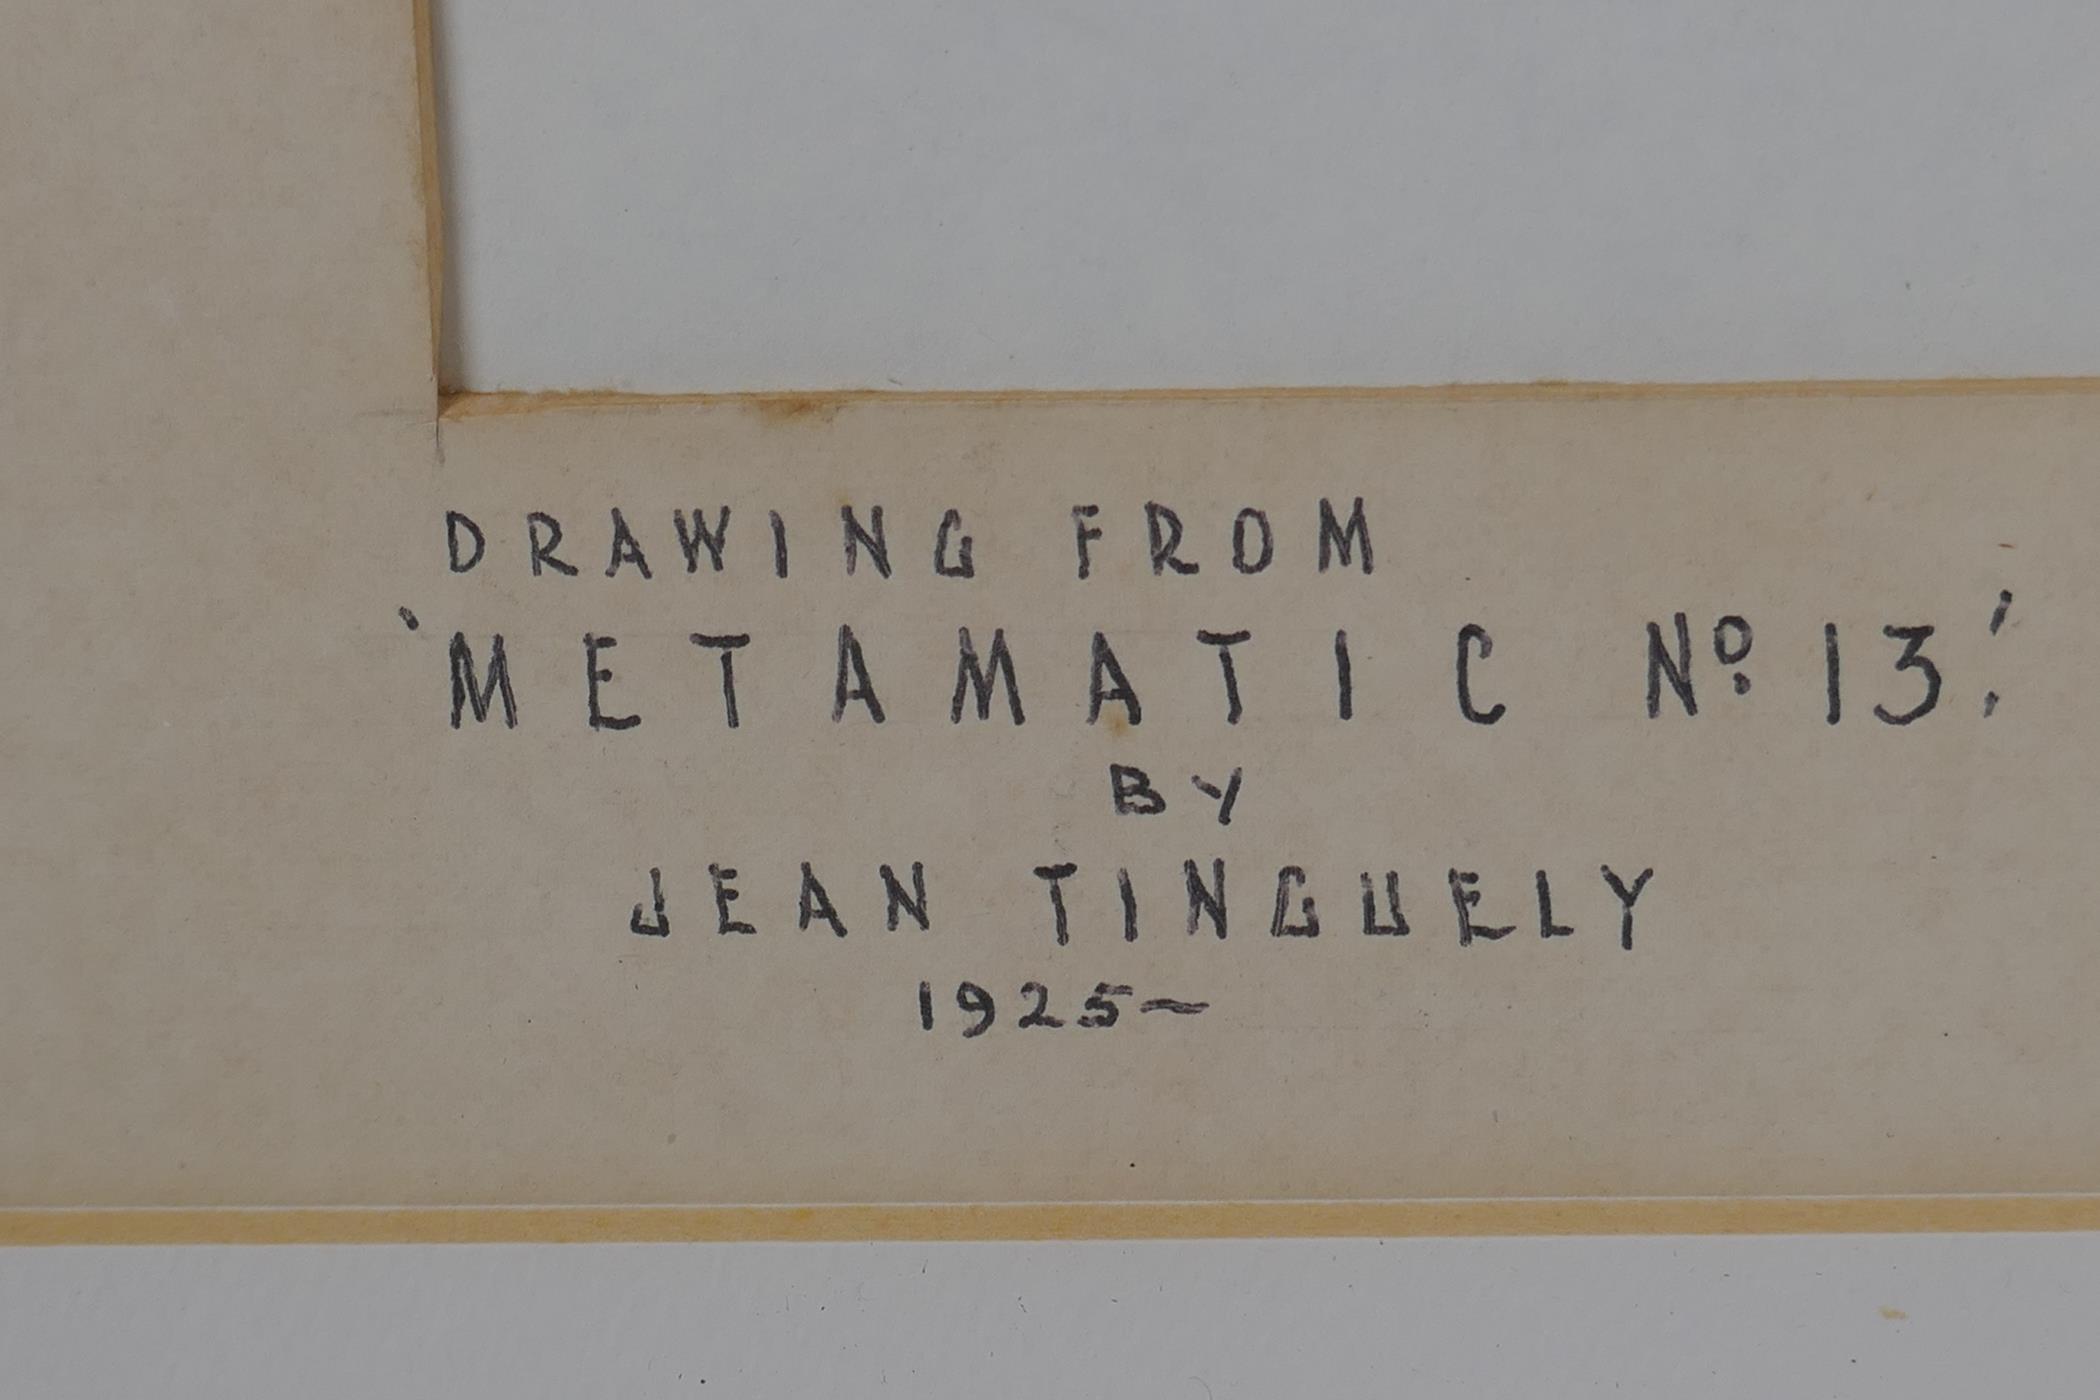 Attributed to Jean Tinguely (Swiss, 1925-1991), Metamatic No 13, abstract artwork purportedly - Image 4 of 8